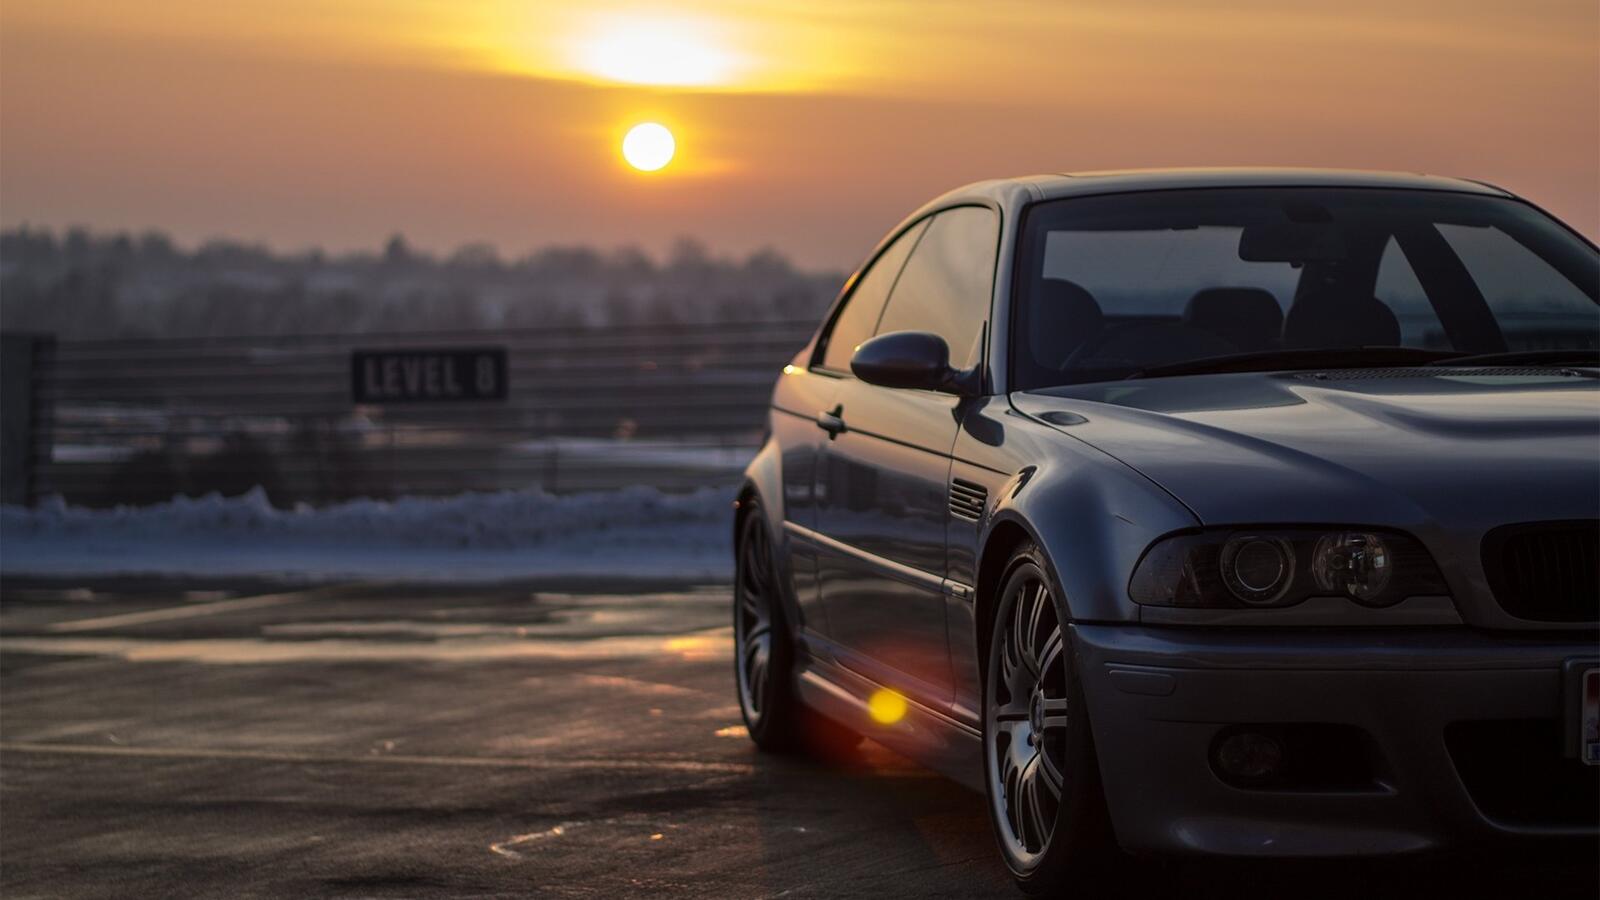 Wallpapers BMW beauty sunset on the desktop